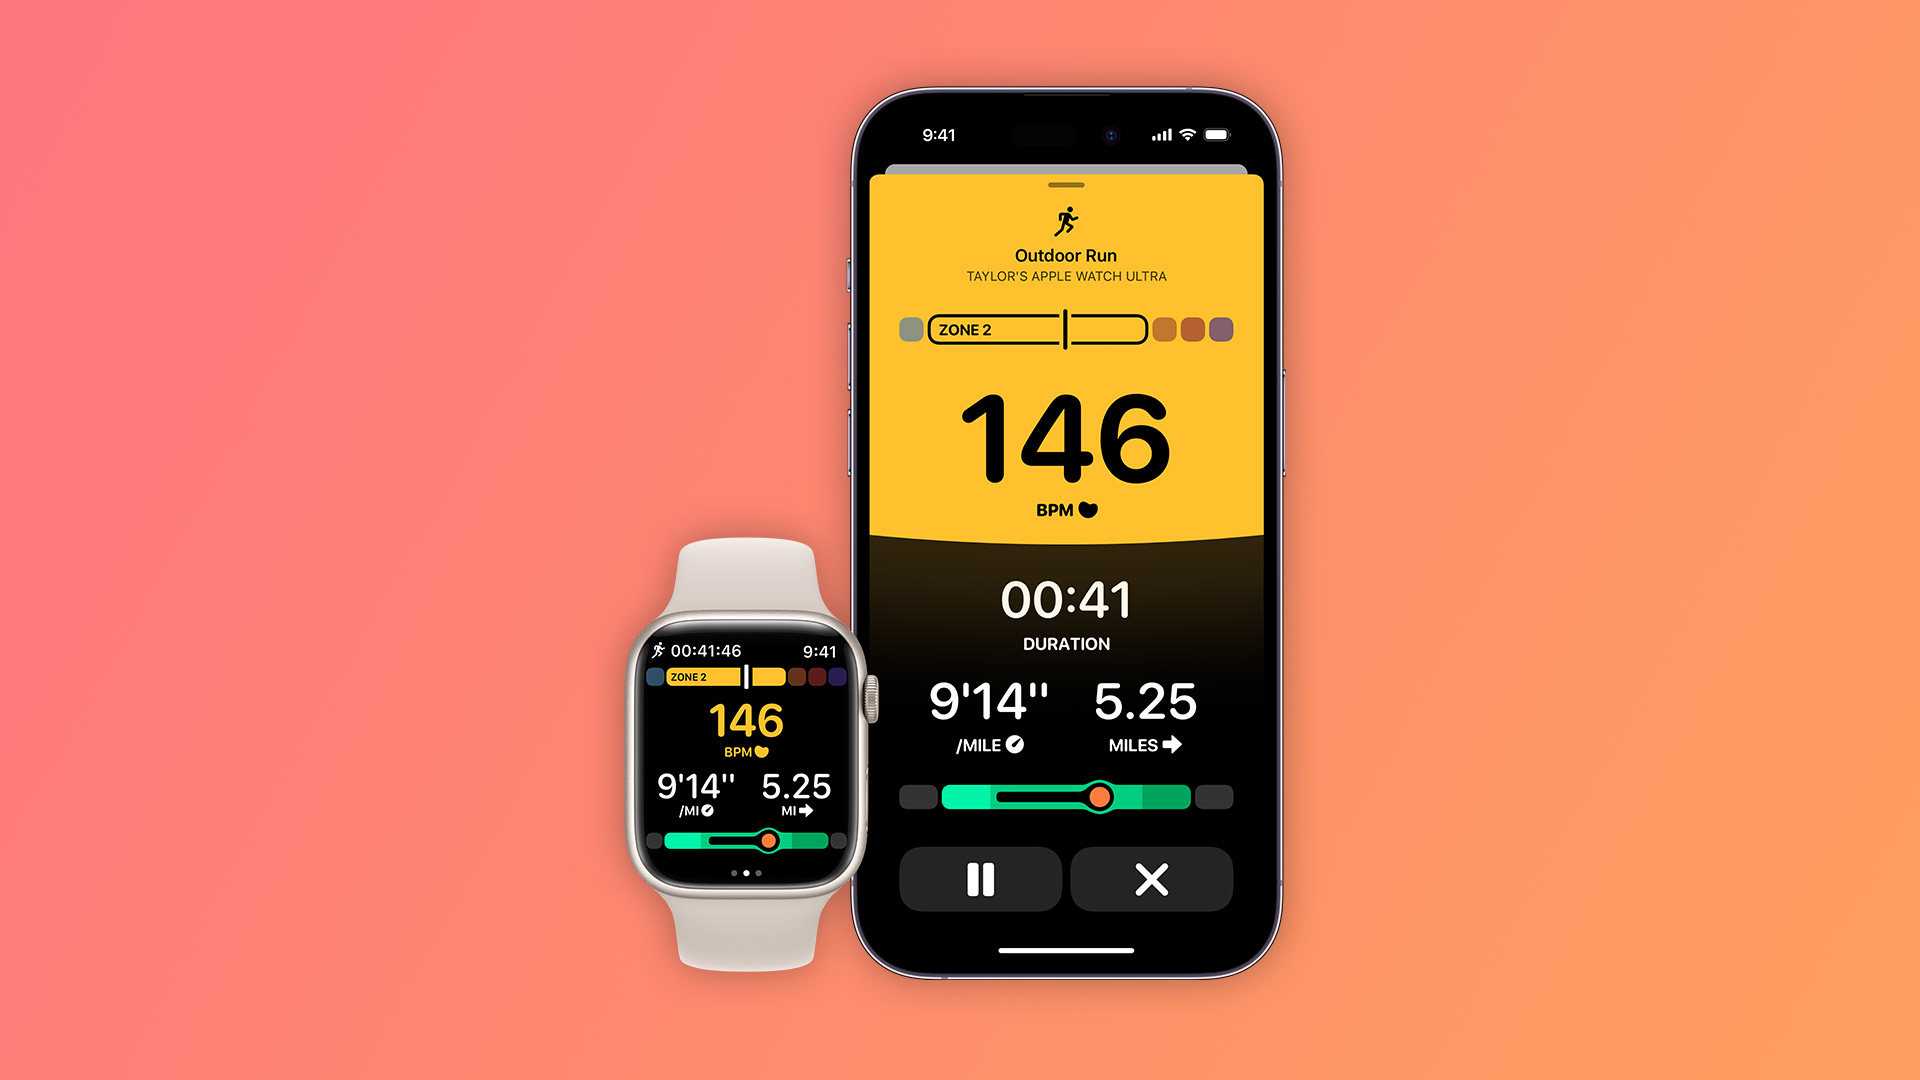 Gentler Streak now lets users keep track of Apple Watch workouts from iPhone with Live Activities